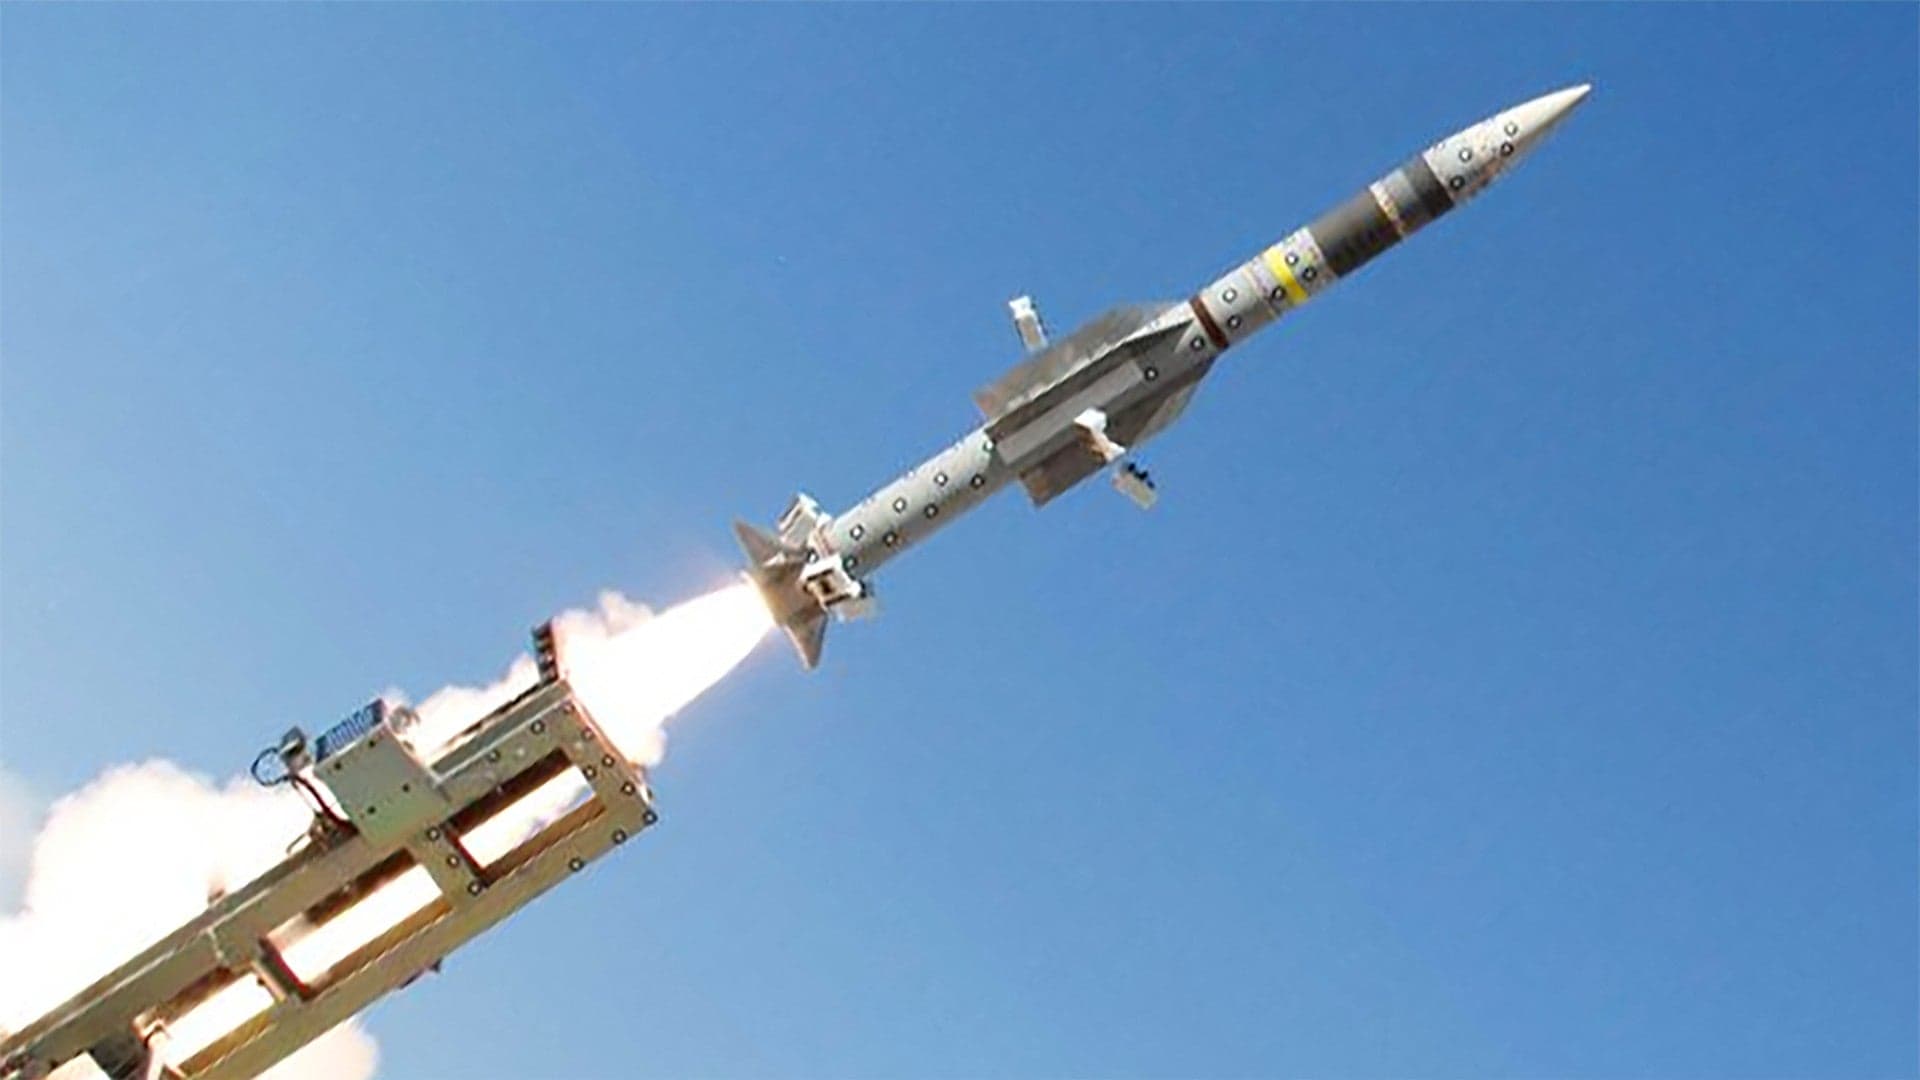 Army Offers Glimpse Of New Low-Cost Surface-To-Air Missile